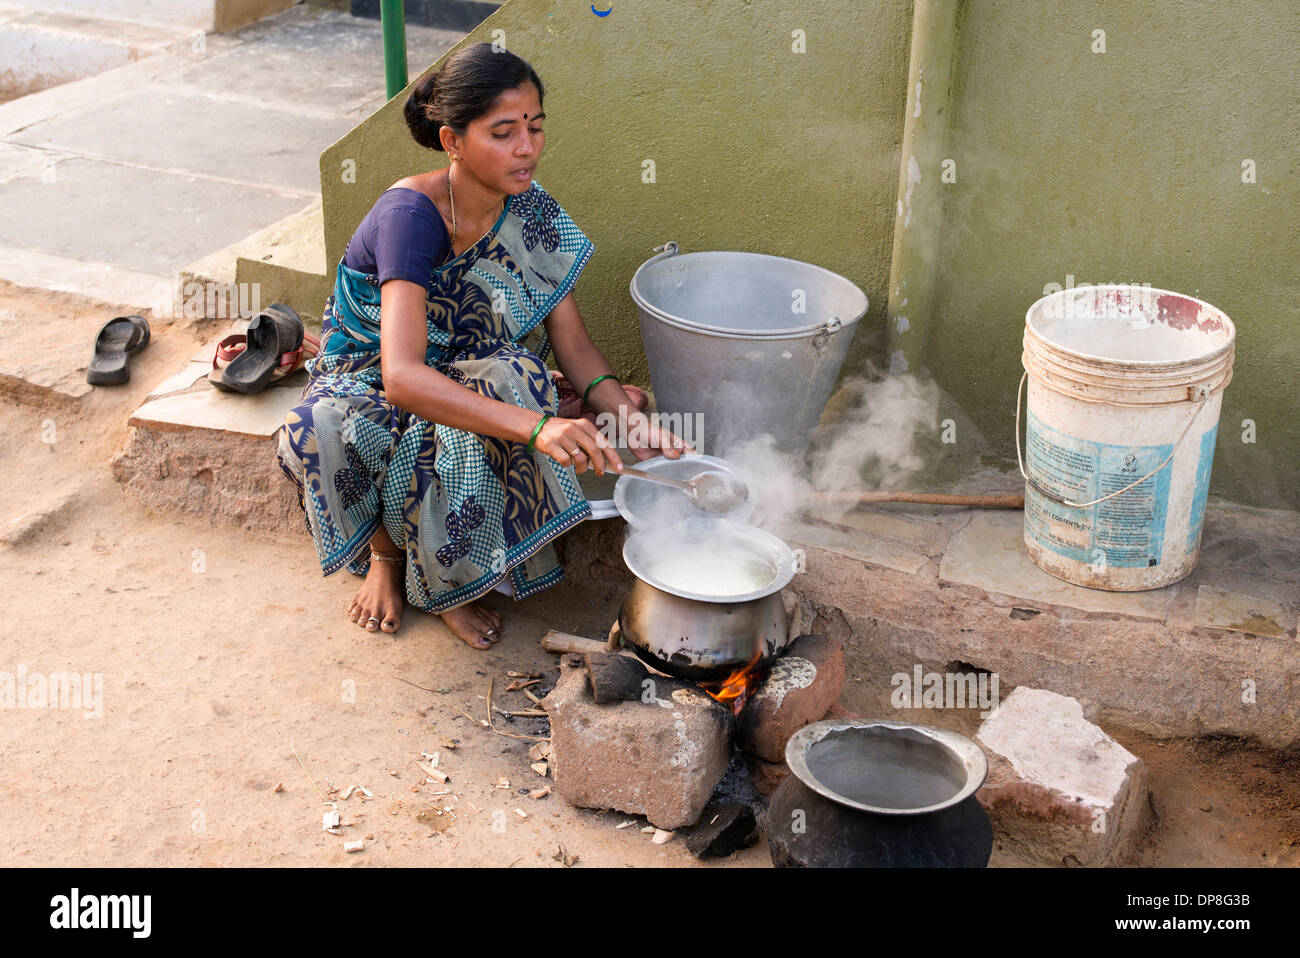 https://c8.alamy.com/comp/DP8G3B/indian-woman-cooking-rice-on-an-open-fire-outside-her-home-in-a-rural-DP8G3B.jpg